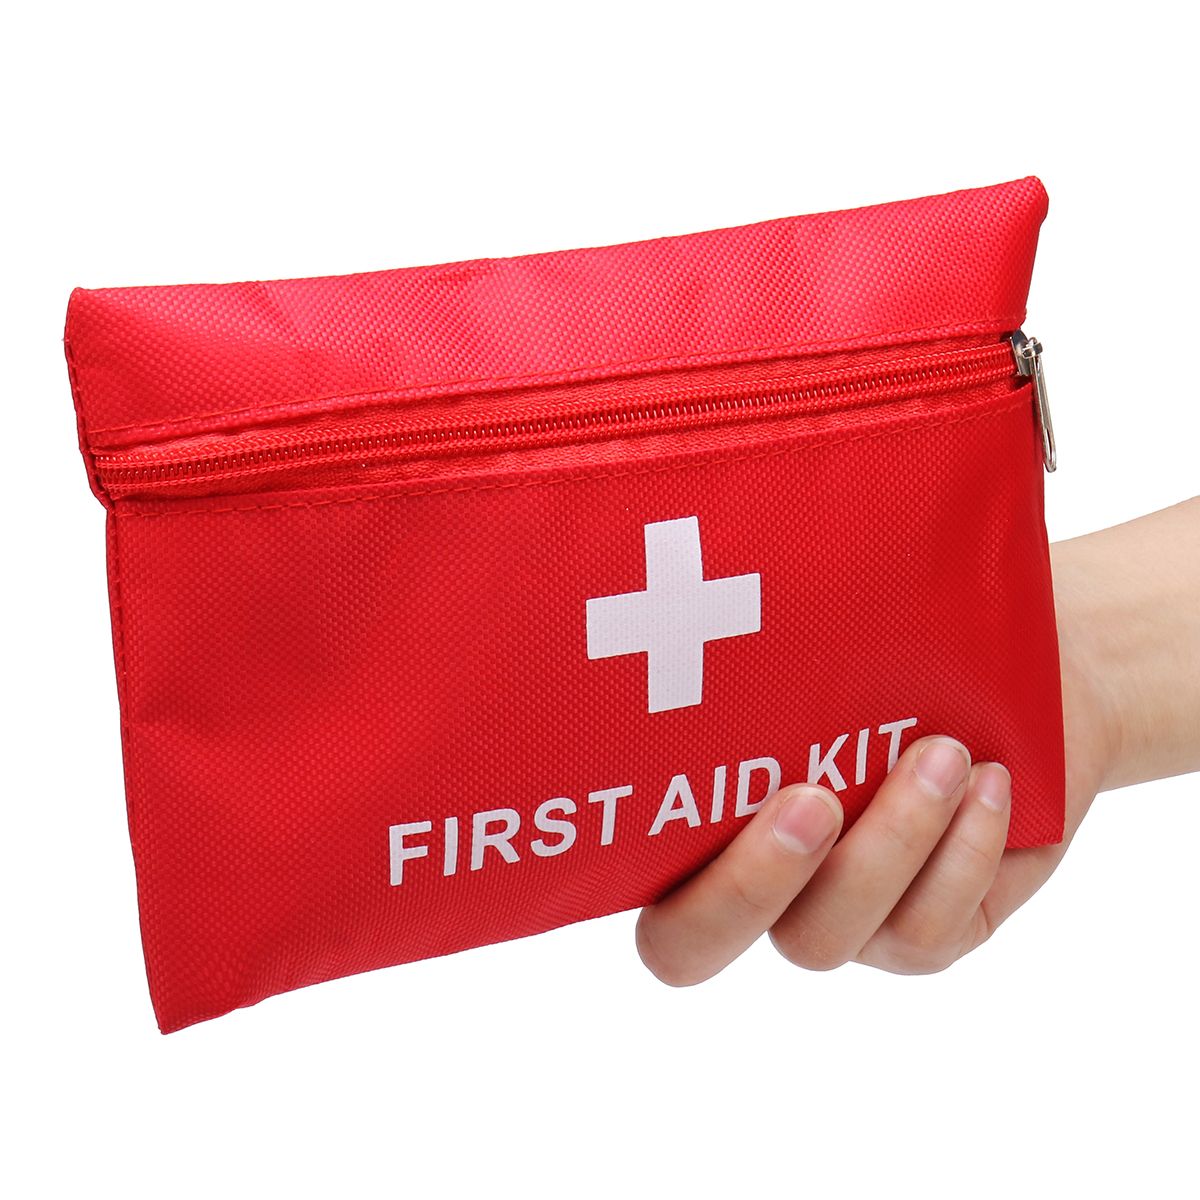 Emergency-First-Aid-Kit-39-Piece-Survival-Supplies-Bag-for-Car-Travel-Home-Emergency-Box-1420492